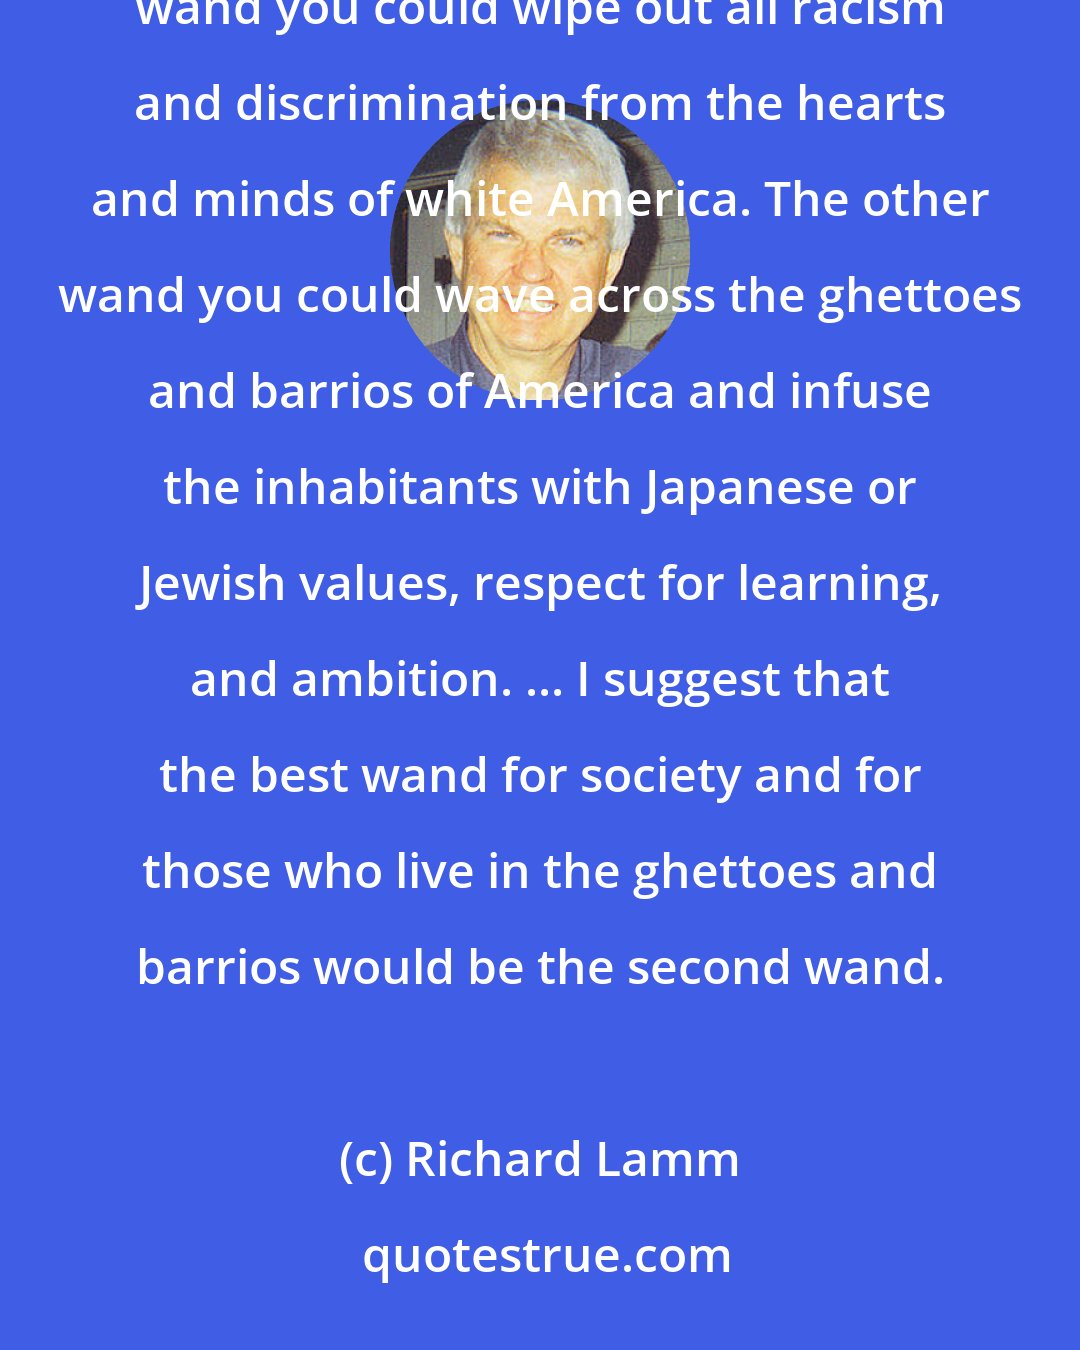 Richard Lamm: Let me offer you, metaphorically, two magic wands that have sweeping powers to change society. With one wand you could wipe out all racism and discrimination from the hearts and minds of white America. The other wand you could wave across the ghettoes and barrios of America and infuse the inhabitants with Japanese or Jewish values, respect for learning, and ambition. ... I suggest that the best wand for society and for those who live in the ghettoes and barrios would be the second wand.